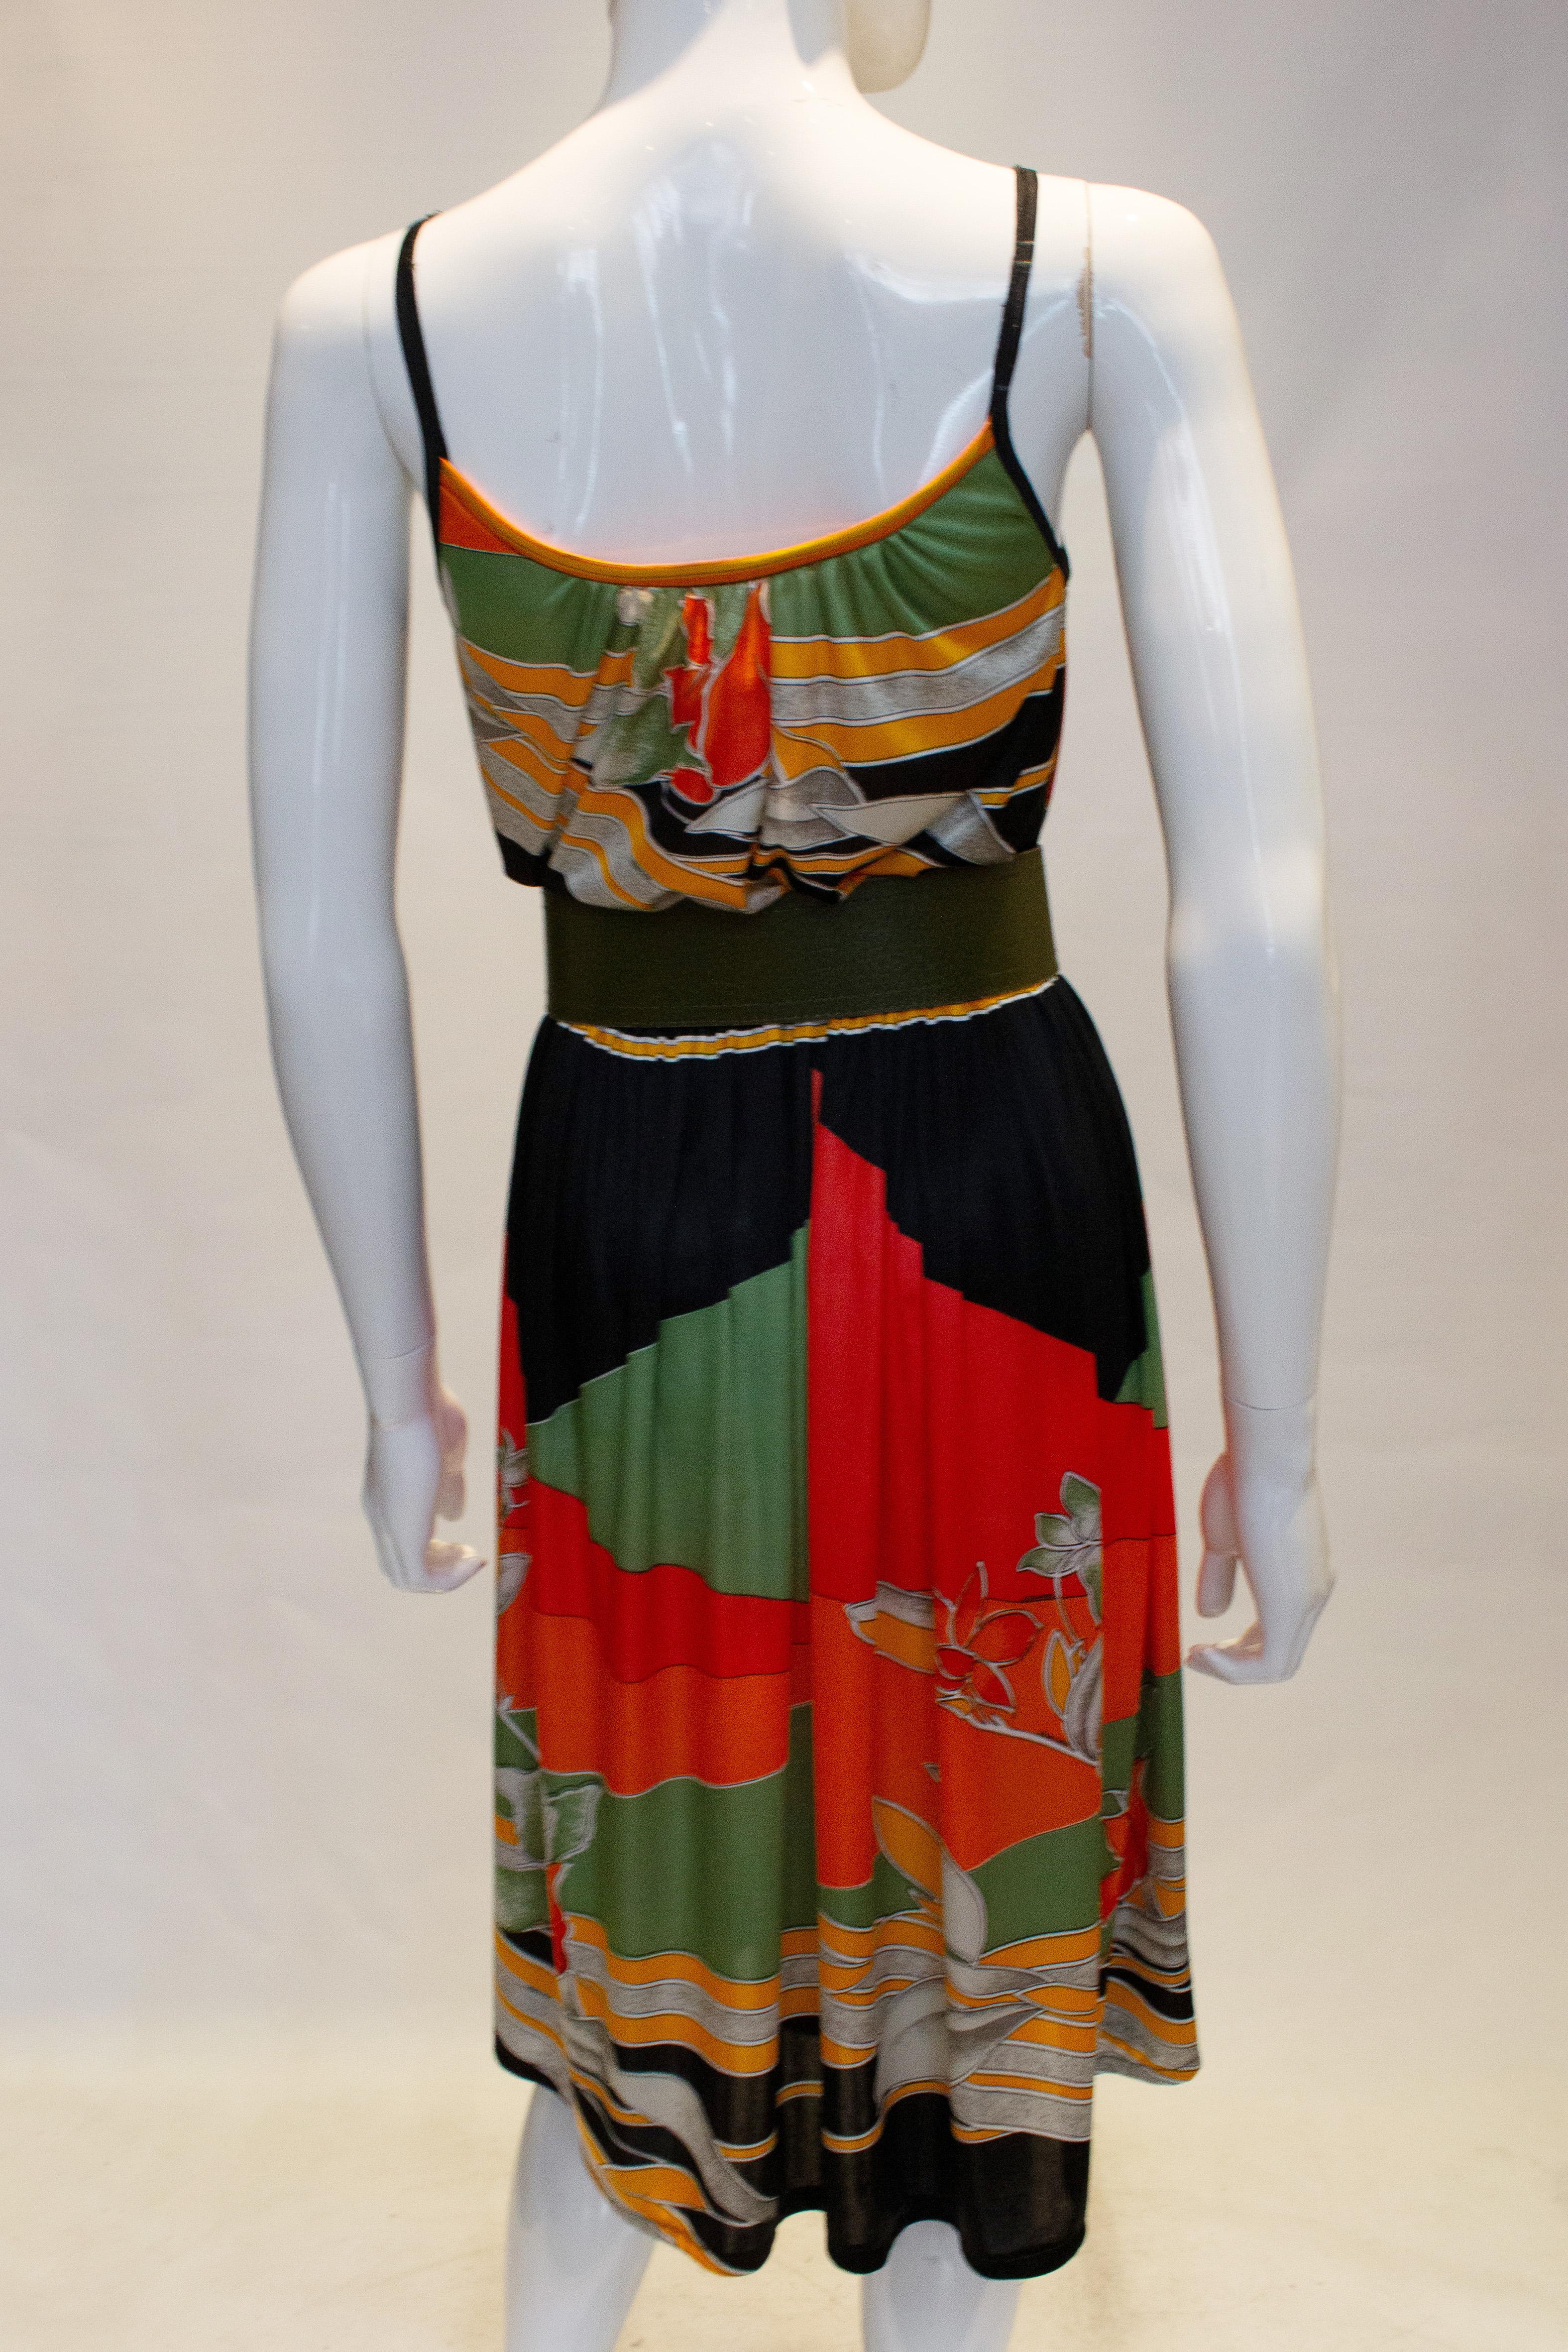 A great vintage dress by Leonard, Paris.  The jersey dress is in a great mix  of colours, pumpkin and green. It has an elastic waist and spagetti straps.
Measurements: Bust 34'', waist 27 - 32'', length 47''
